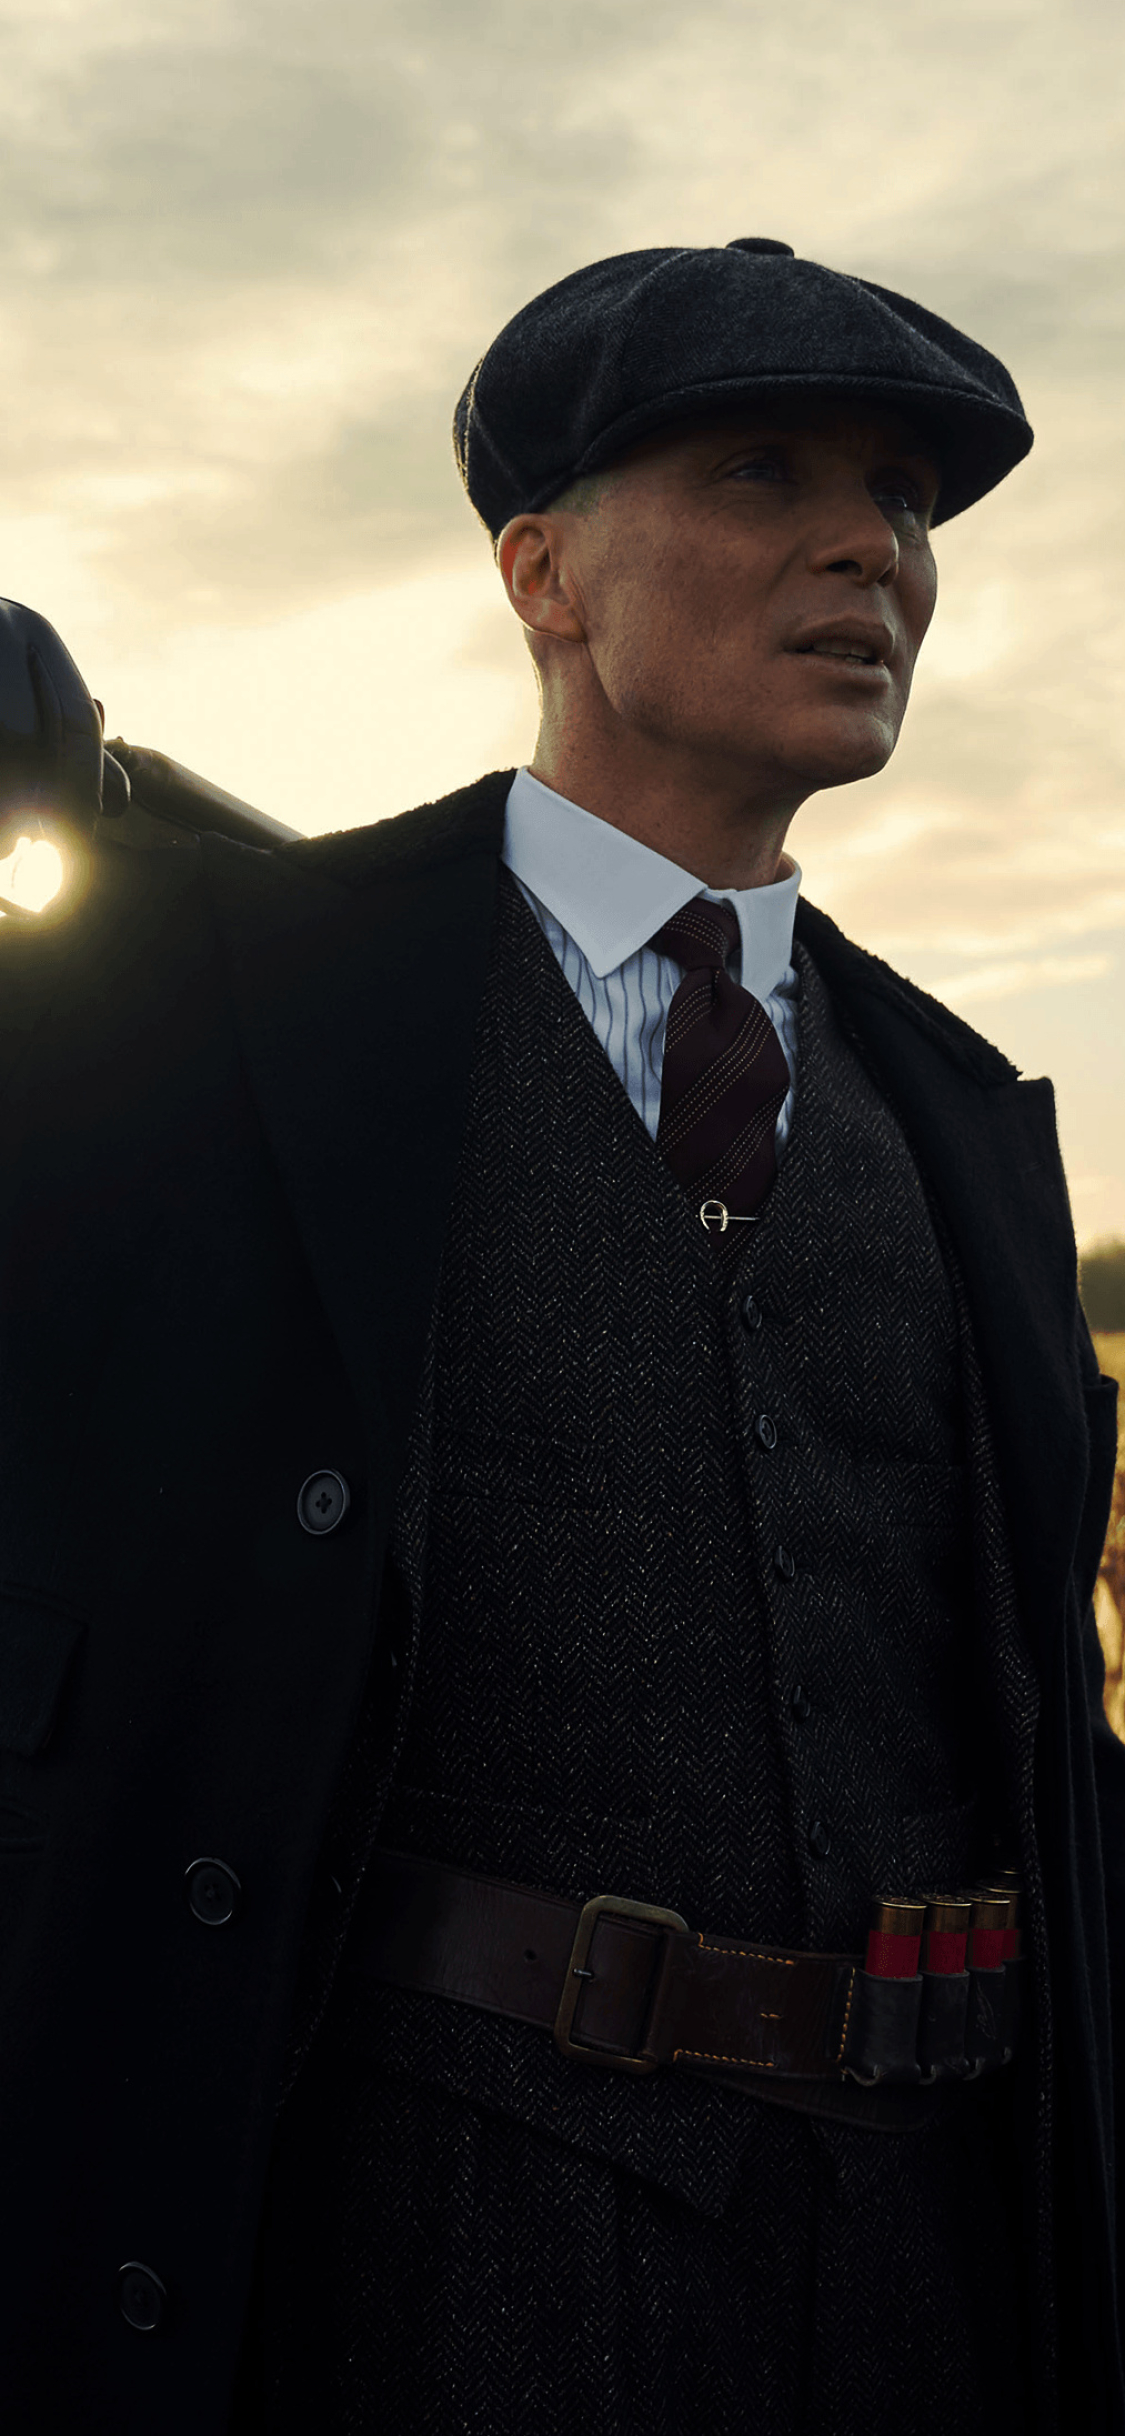 Shelby Family, Peaky Blinders phone wallpapers, Mobile backgrounds, Gangster style, 1130x2440 HD Phone